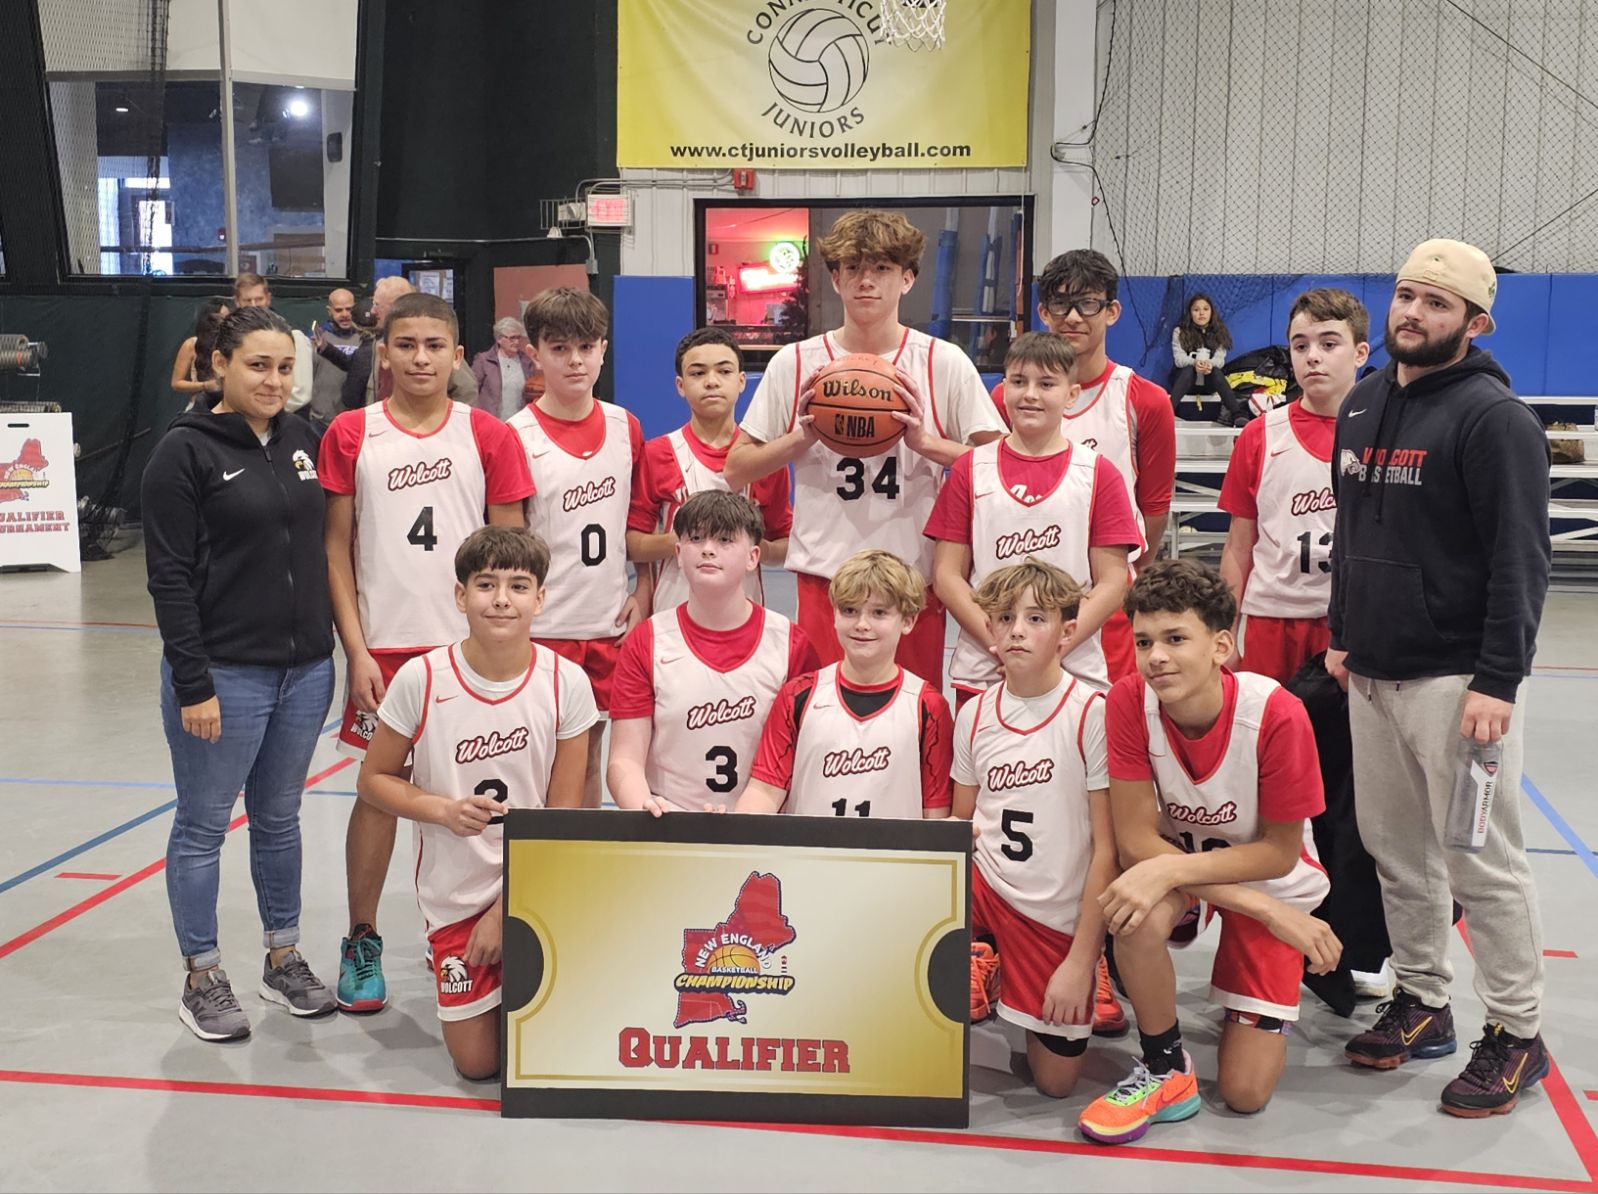 Congrats to our 7th grade boys travel team for qualifying for the 2024 New England Basketball Championship in Providence, Rhode Island March 15-17th. Boys played so well for the first time playing together for some !!

Congratulations 7th Grade Boys!!